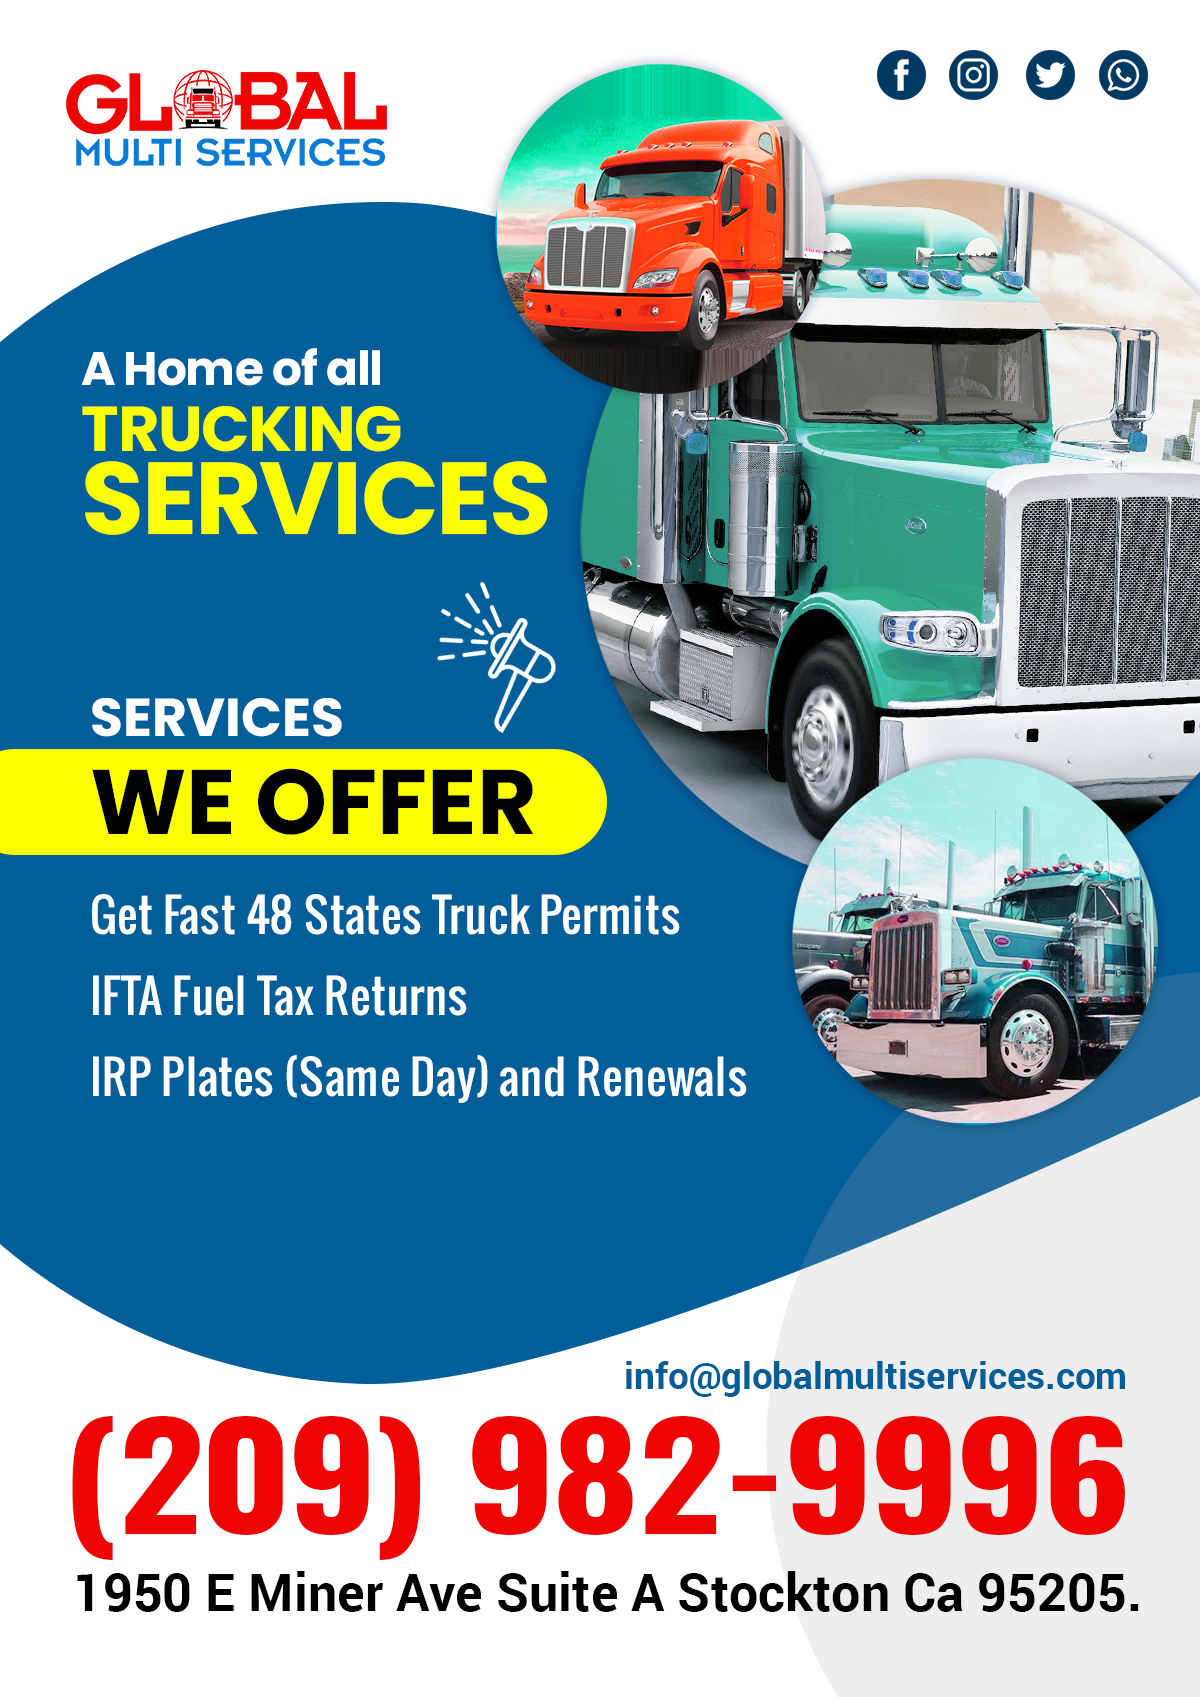 IFTA-Fuel-Tax-Returns-Global-Multiservices.png